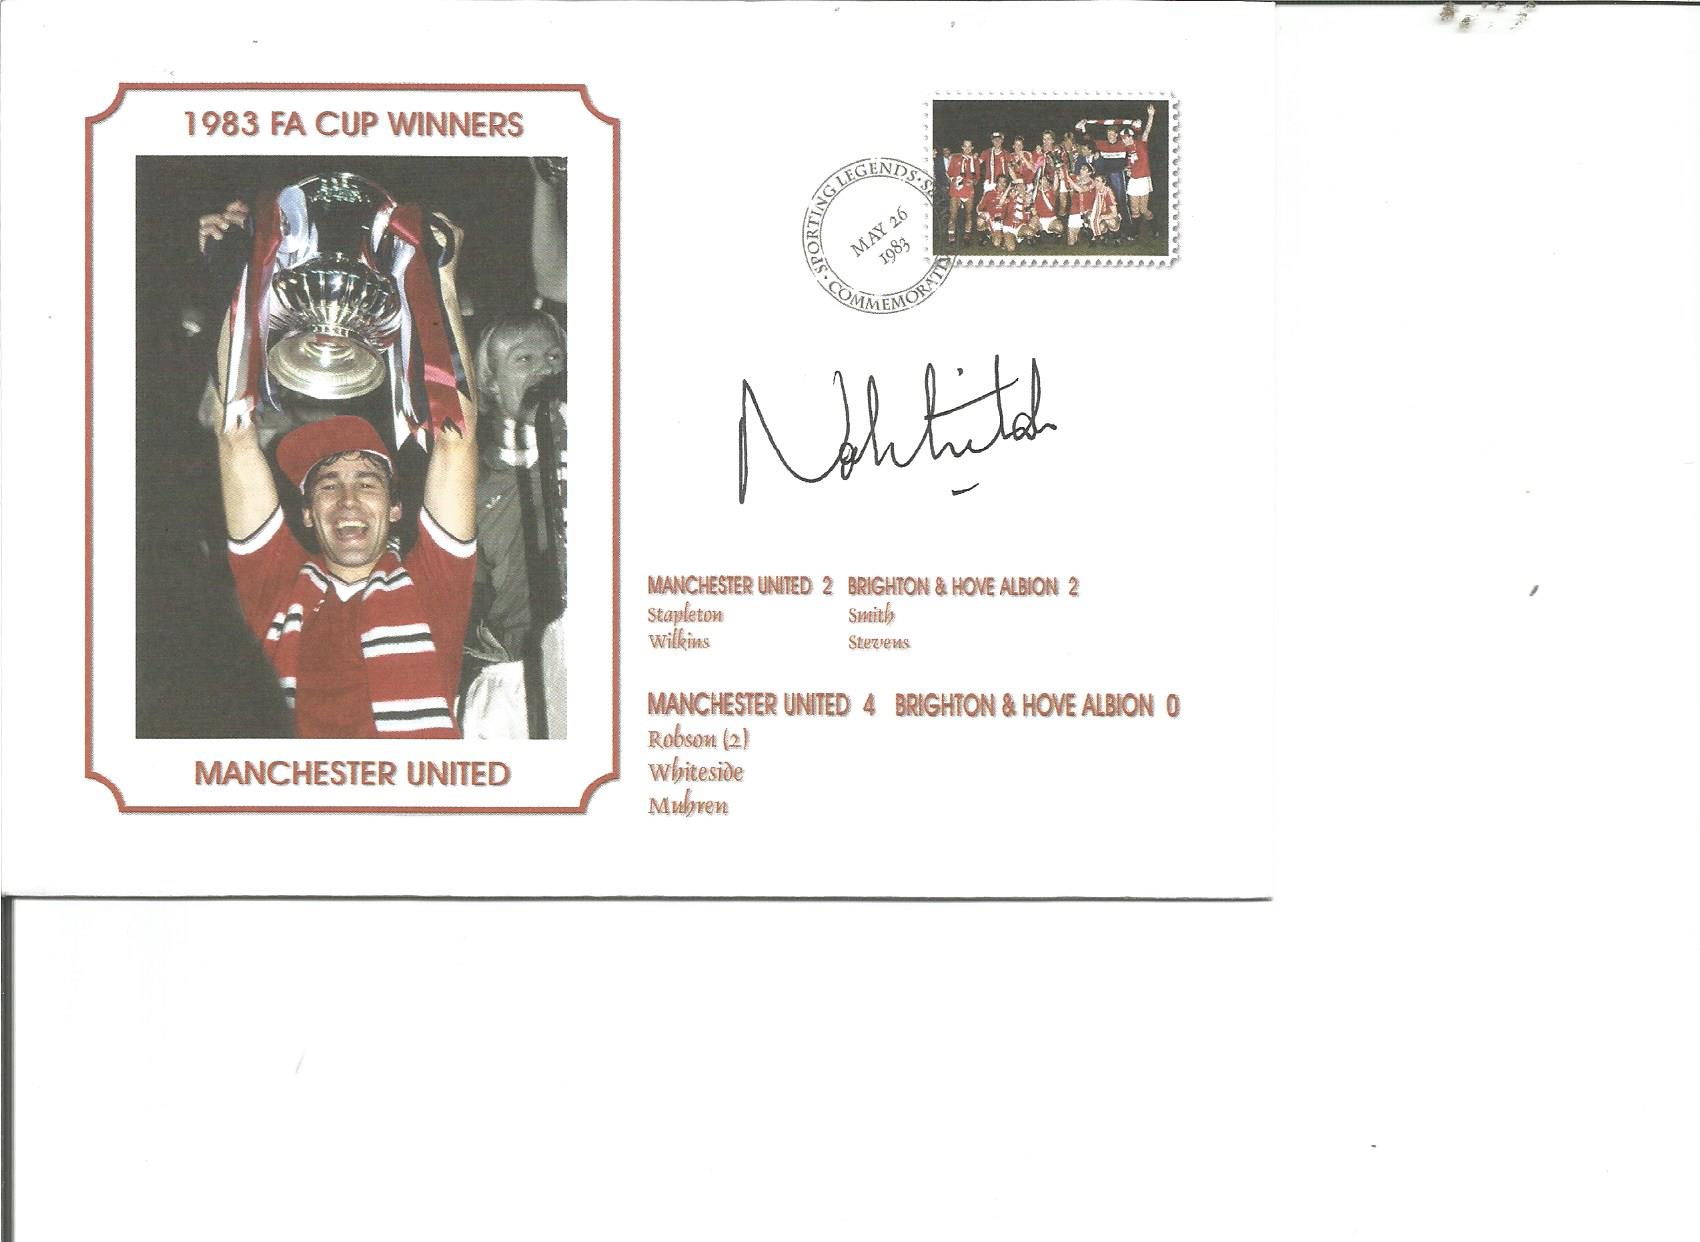 Norman Whiteside Signed Manchester United 1983 Fa Cup Winners Cover. Good Condition. All signed